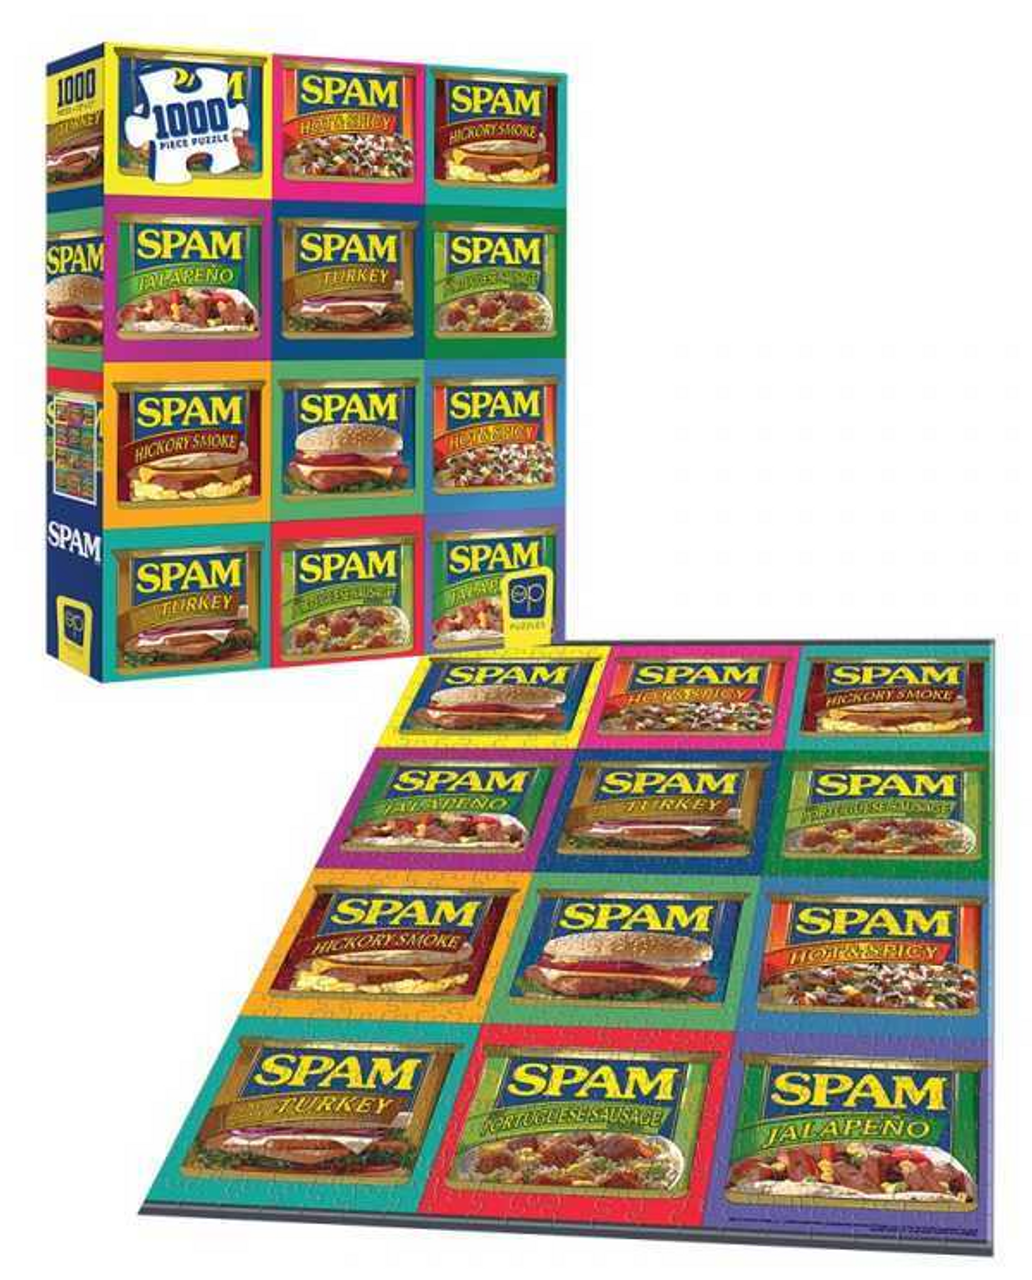 Spam "Sizzle. Pork. And. Mmm." 1000 Piece Puzzle